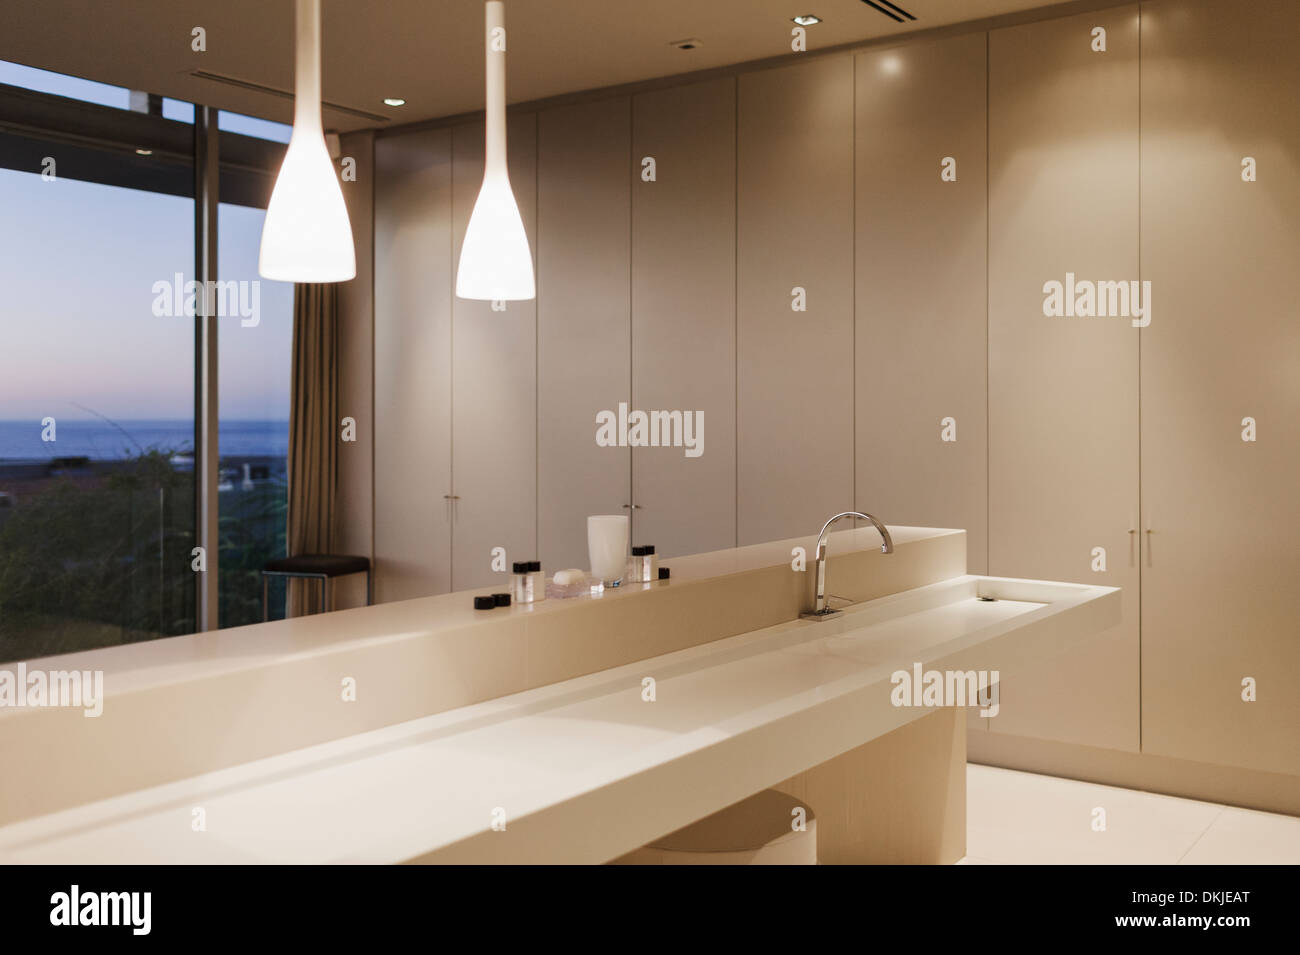 Sink and pendant lights in modern bathroom Stock Photo